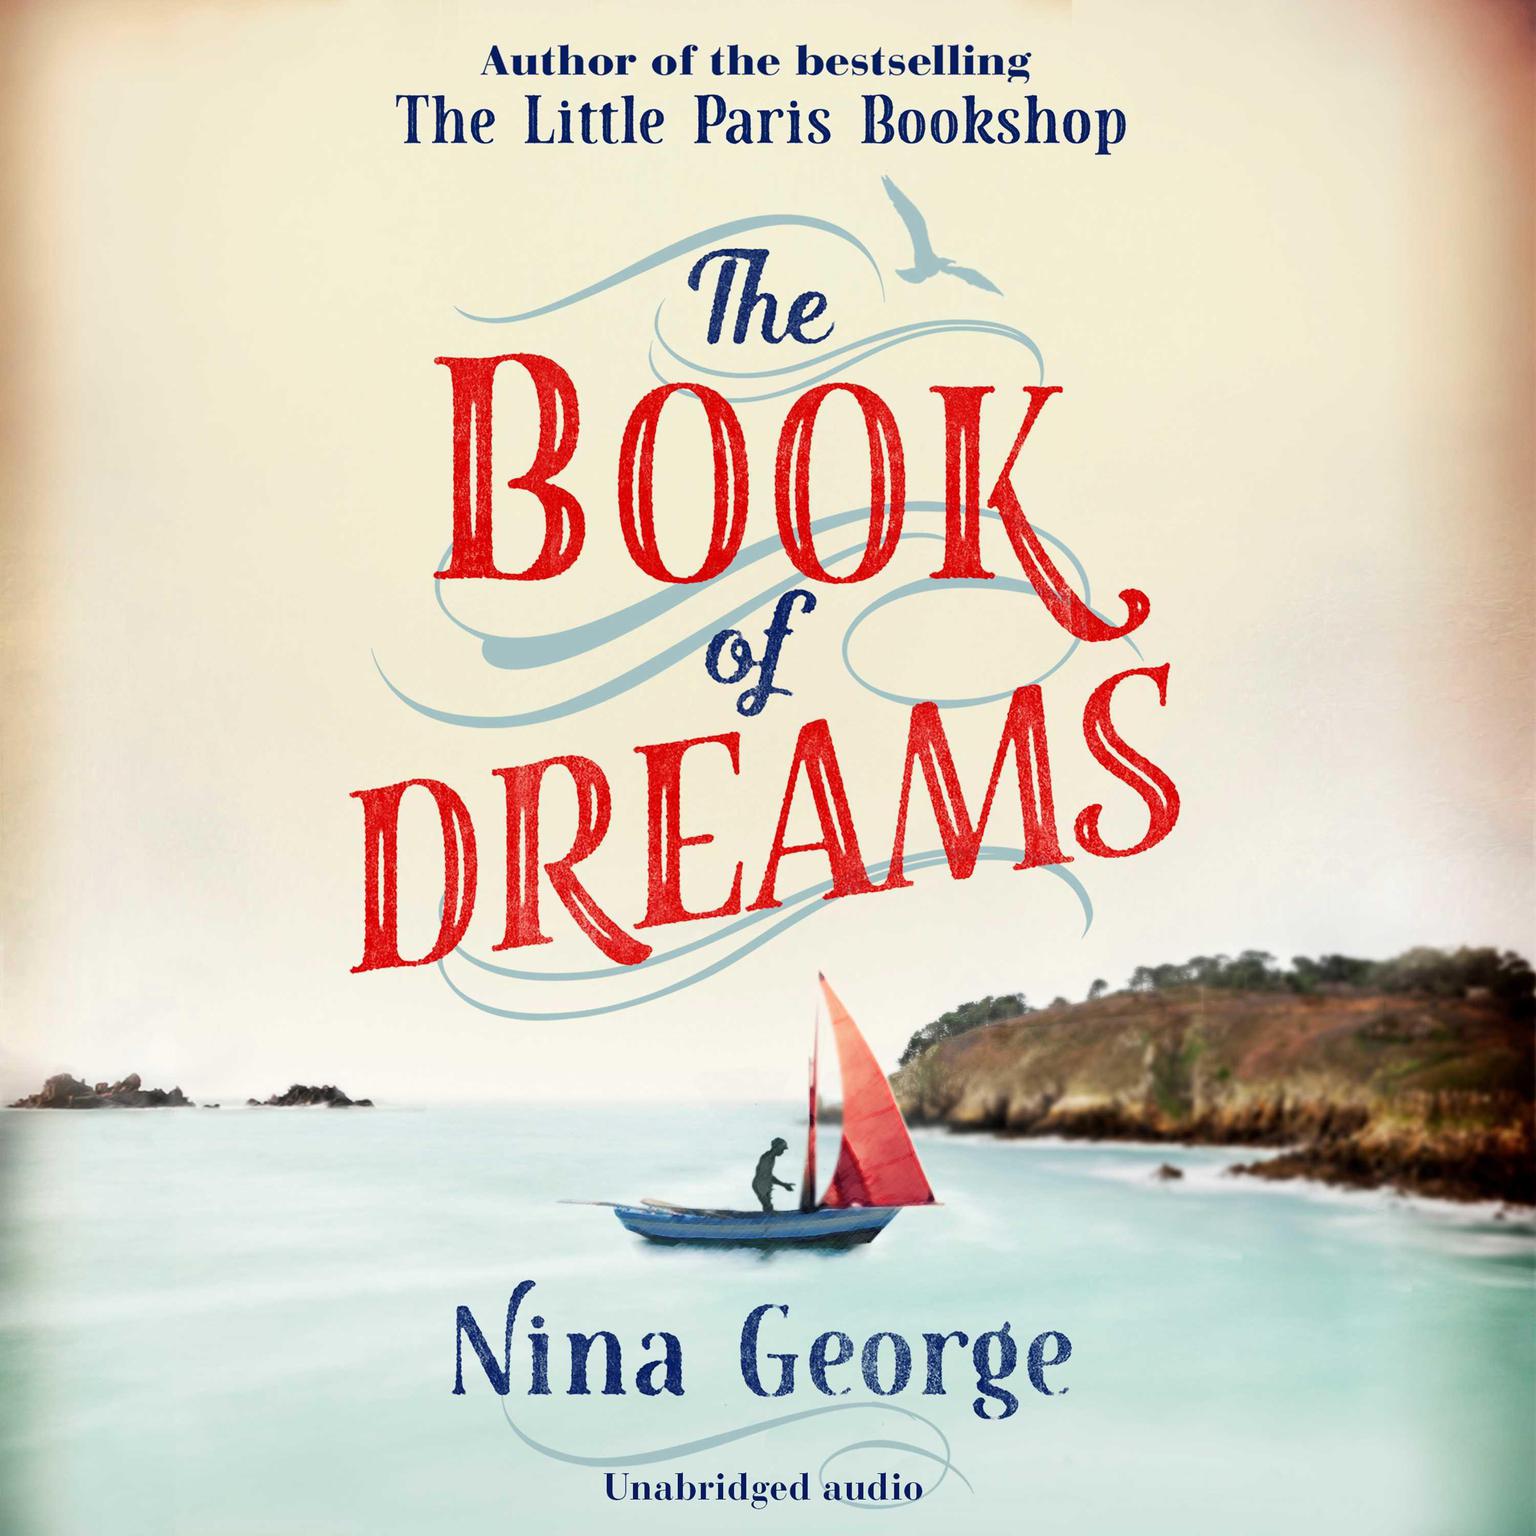 The Book of Dreams Audiobook, by Nina George